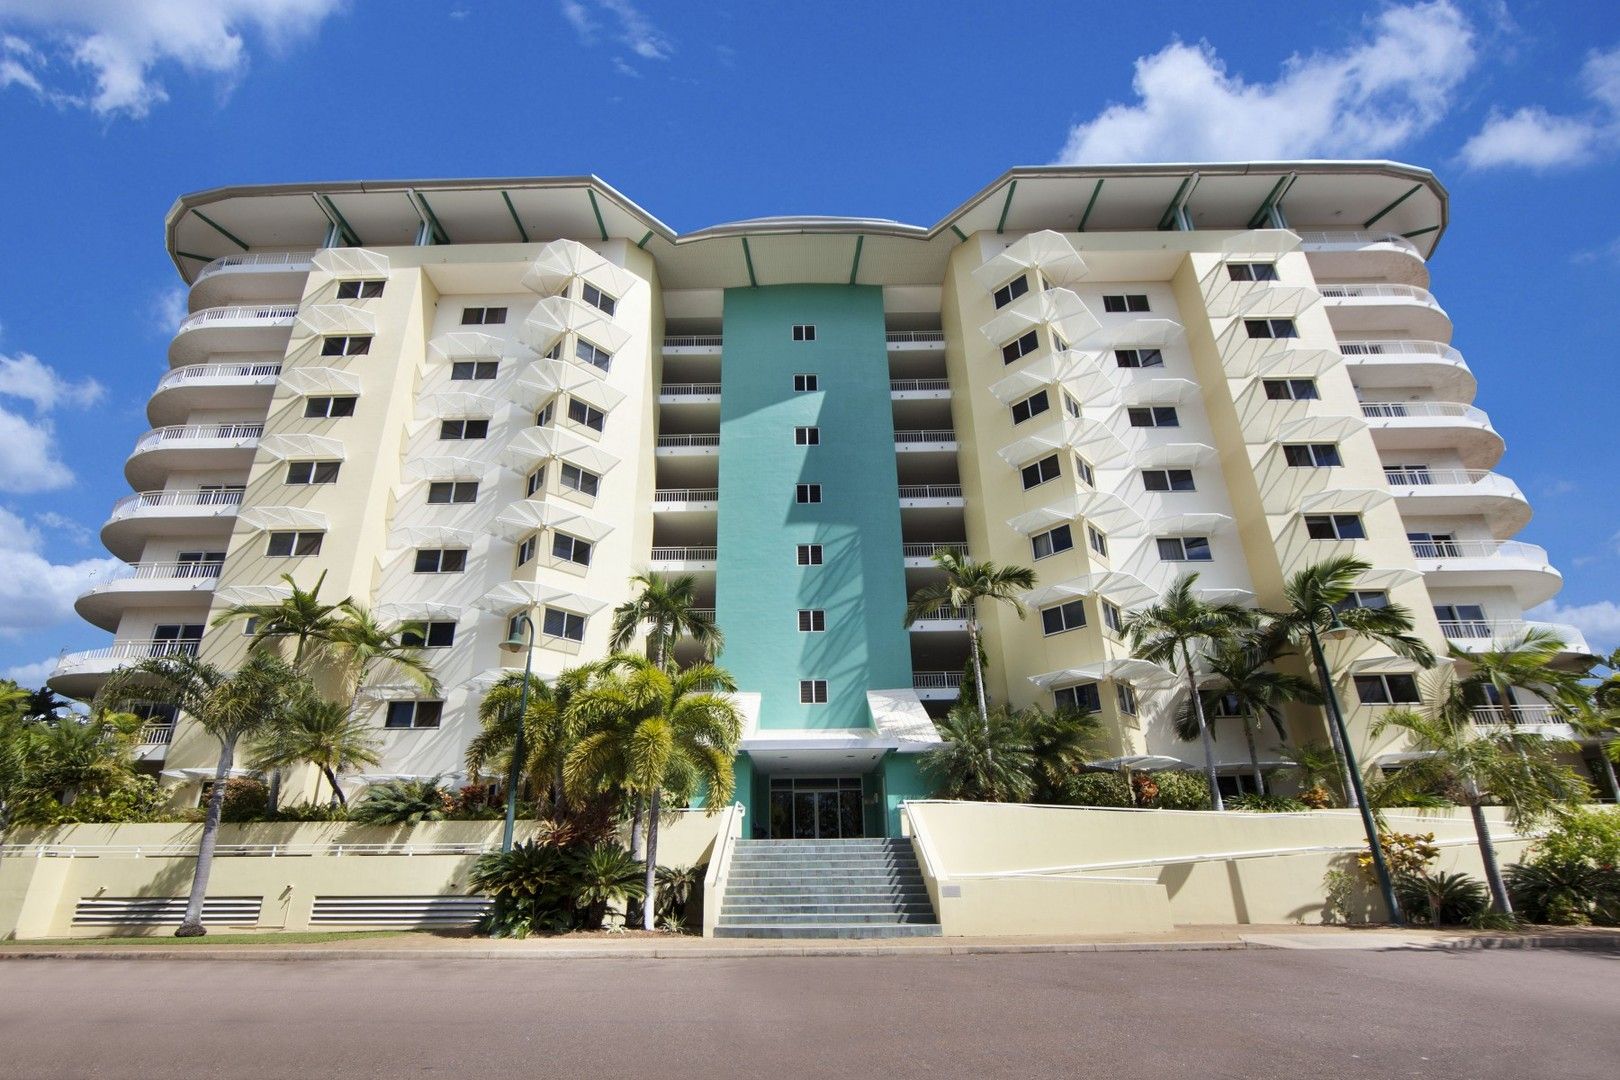 3 bedrooms Apartment / Unit / Flat in 15/1 Daly Street DARWIN CITY NT, 0800